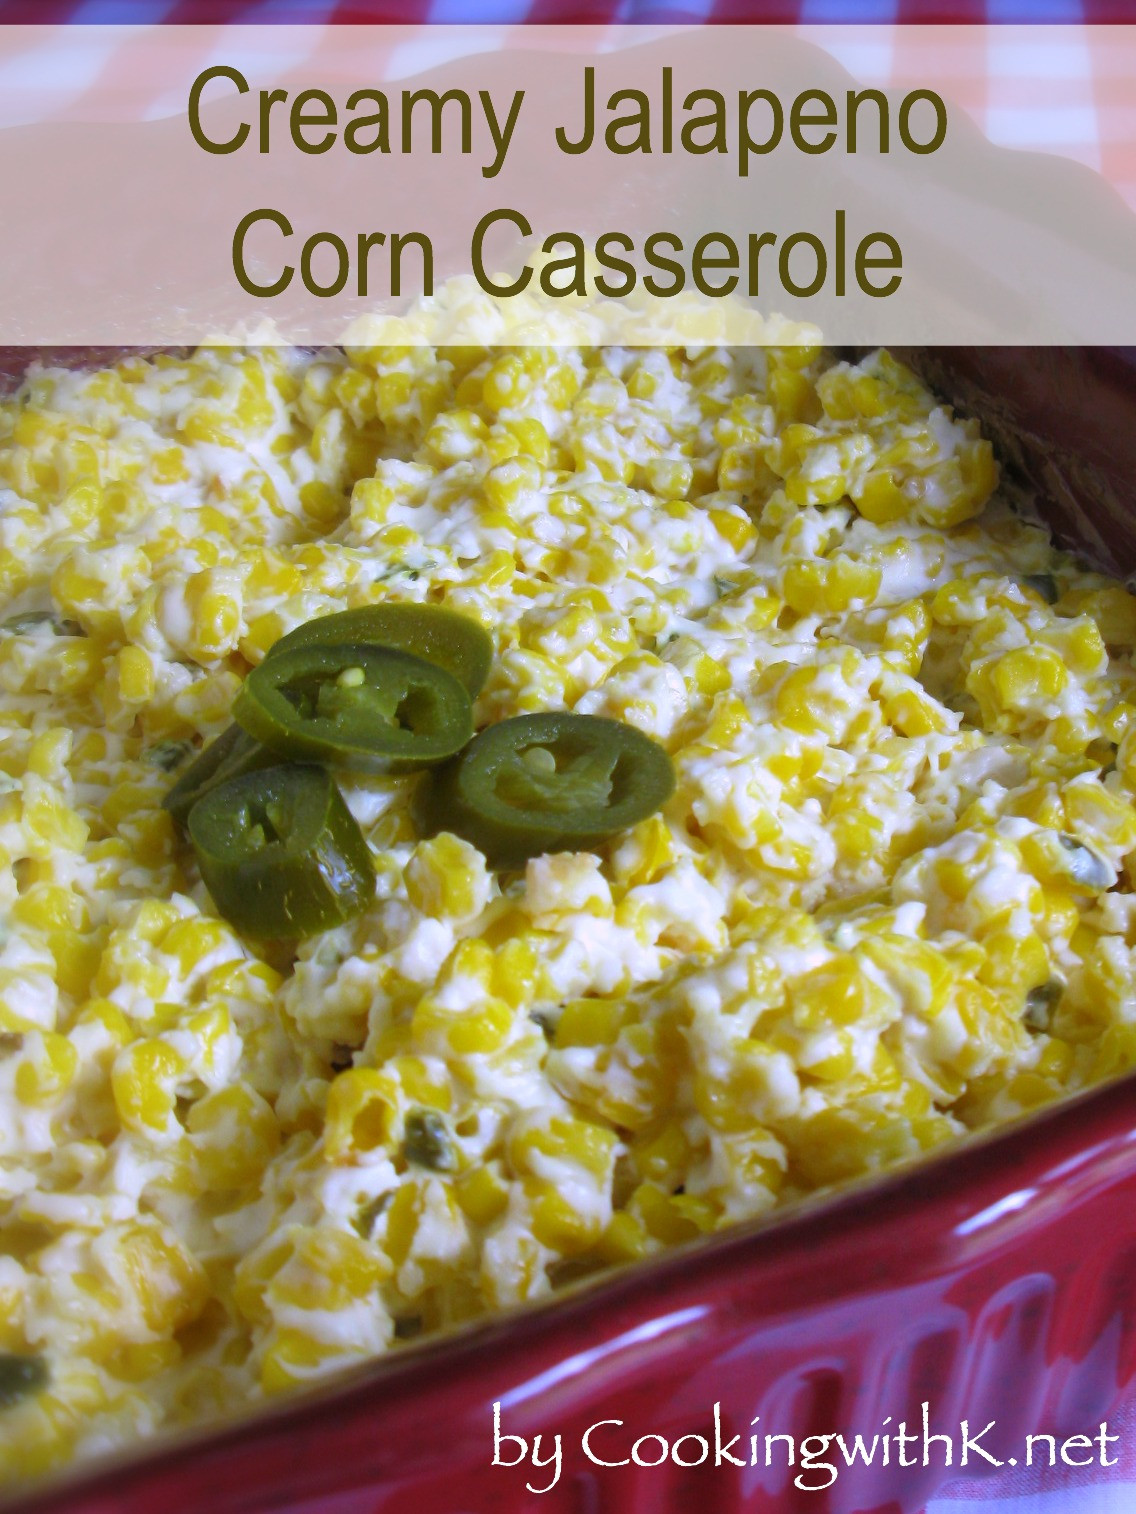 Jalapeno Corn Casserole Best Of Cooking with K Creamy Jalapeno Corn Casserole